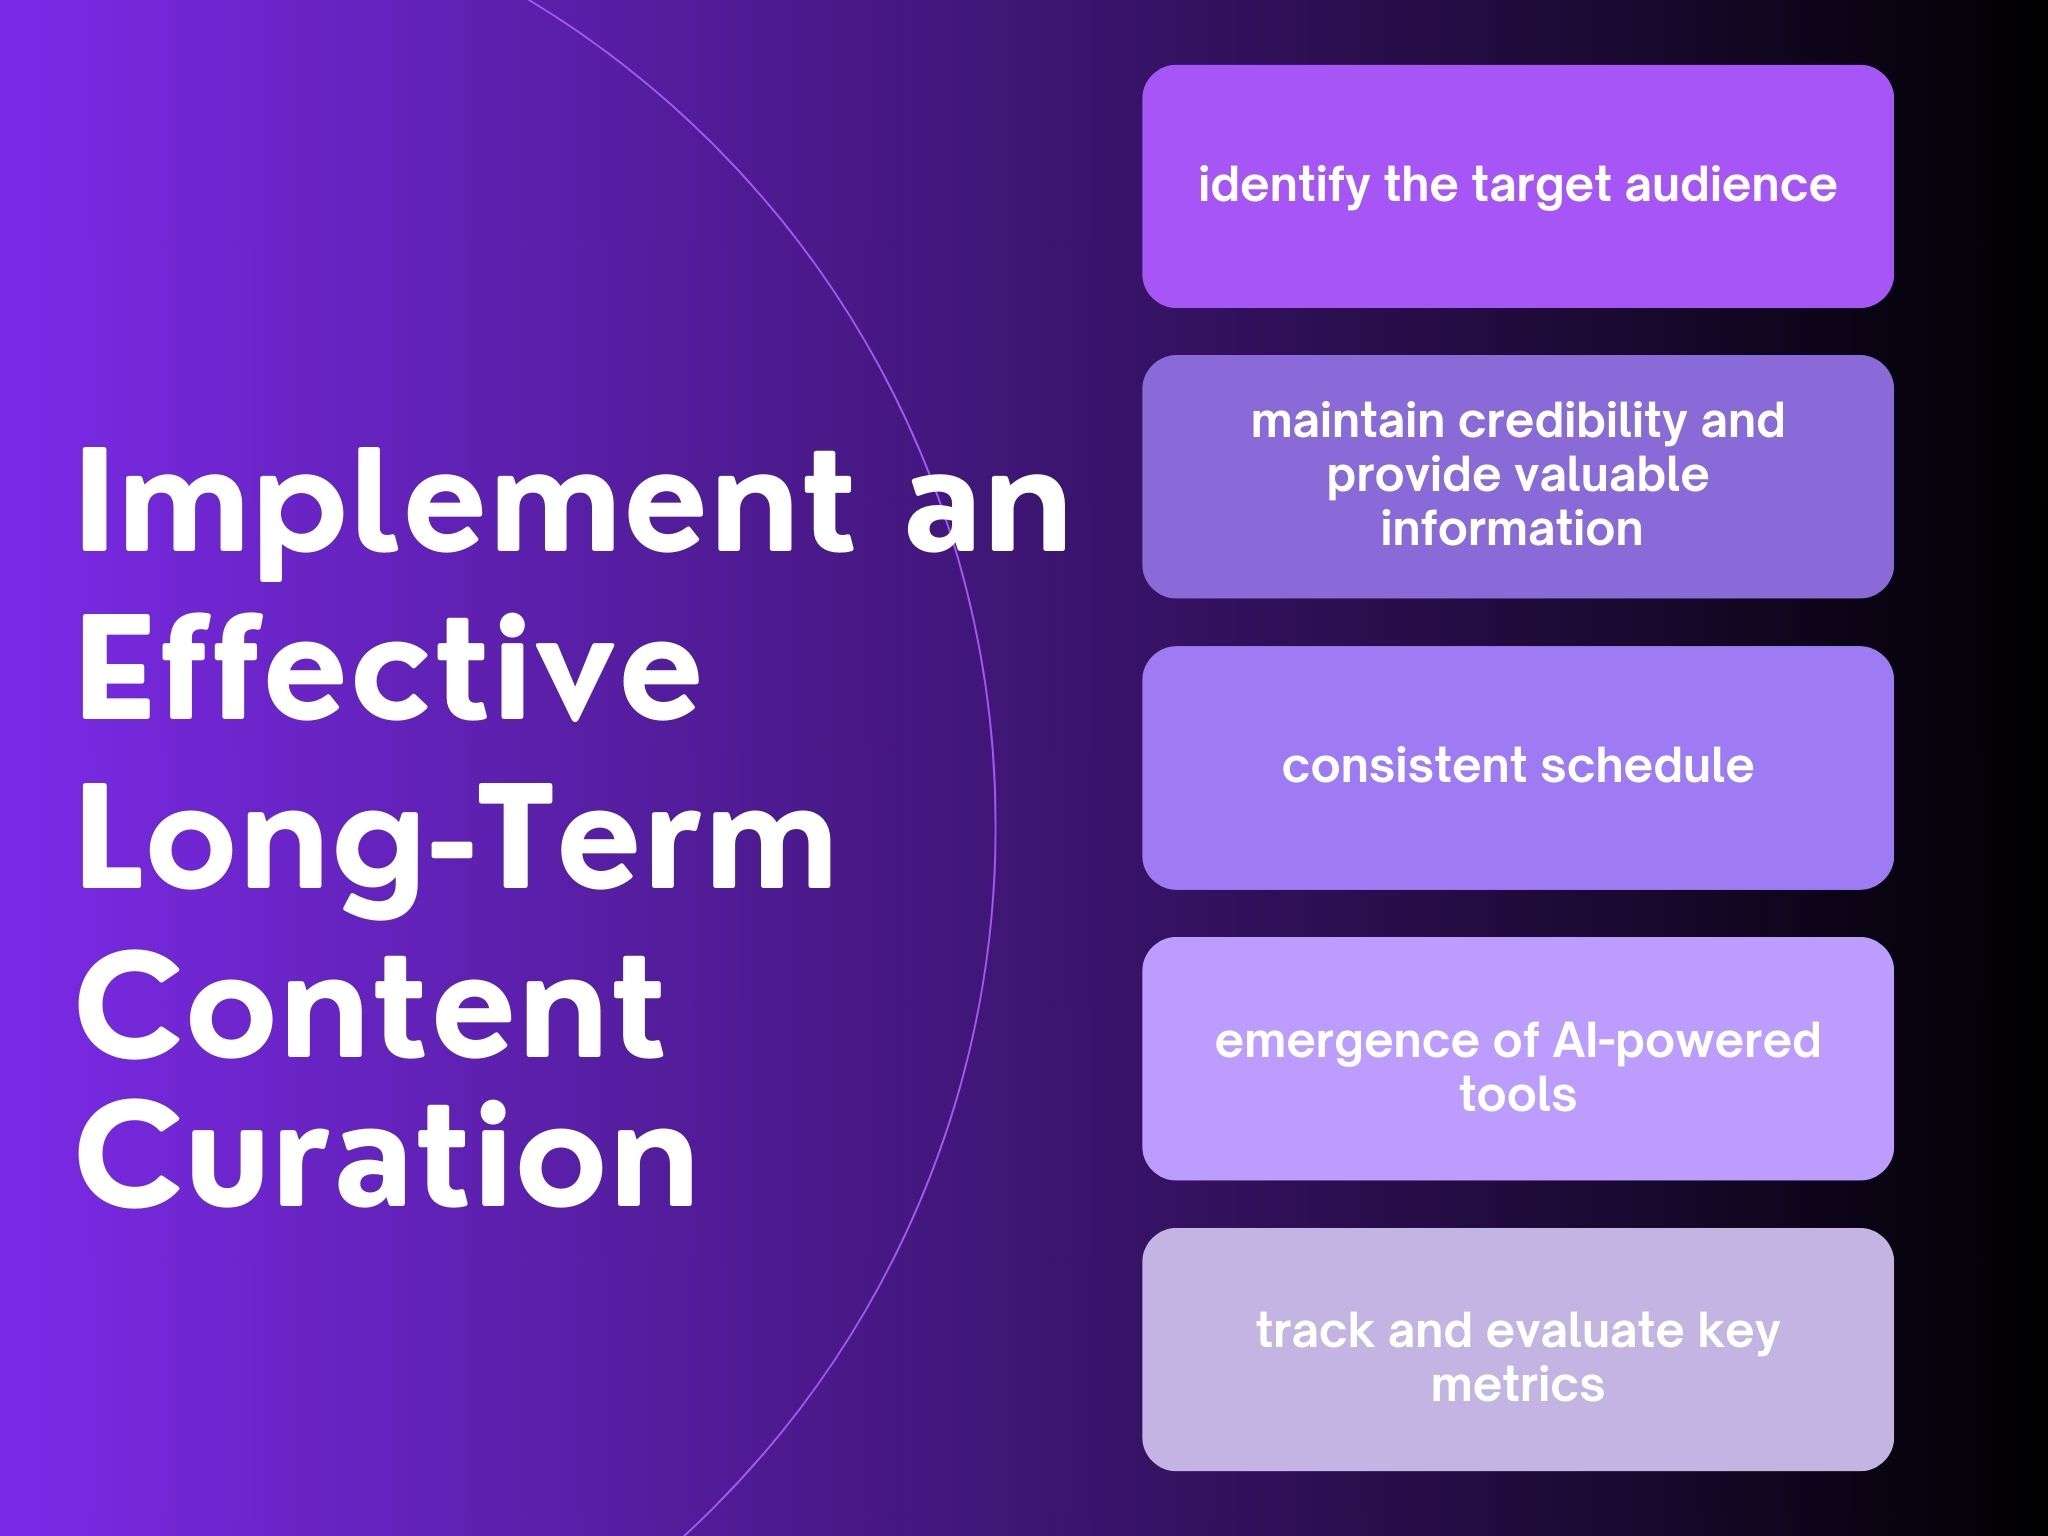 Implement an effective long-term content curation strategy